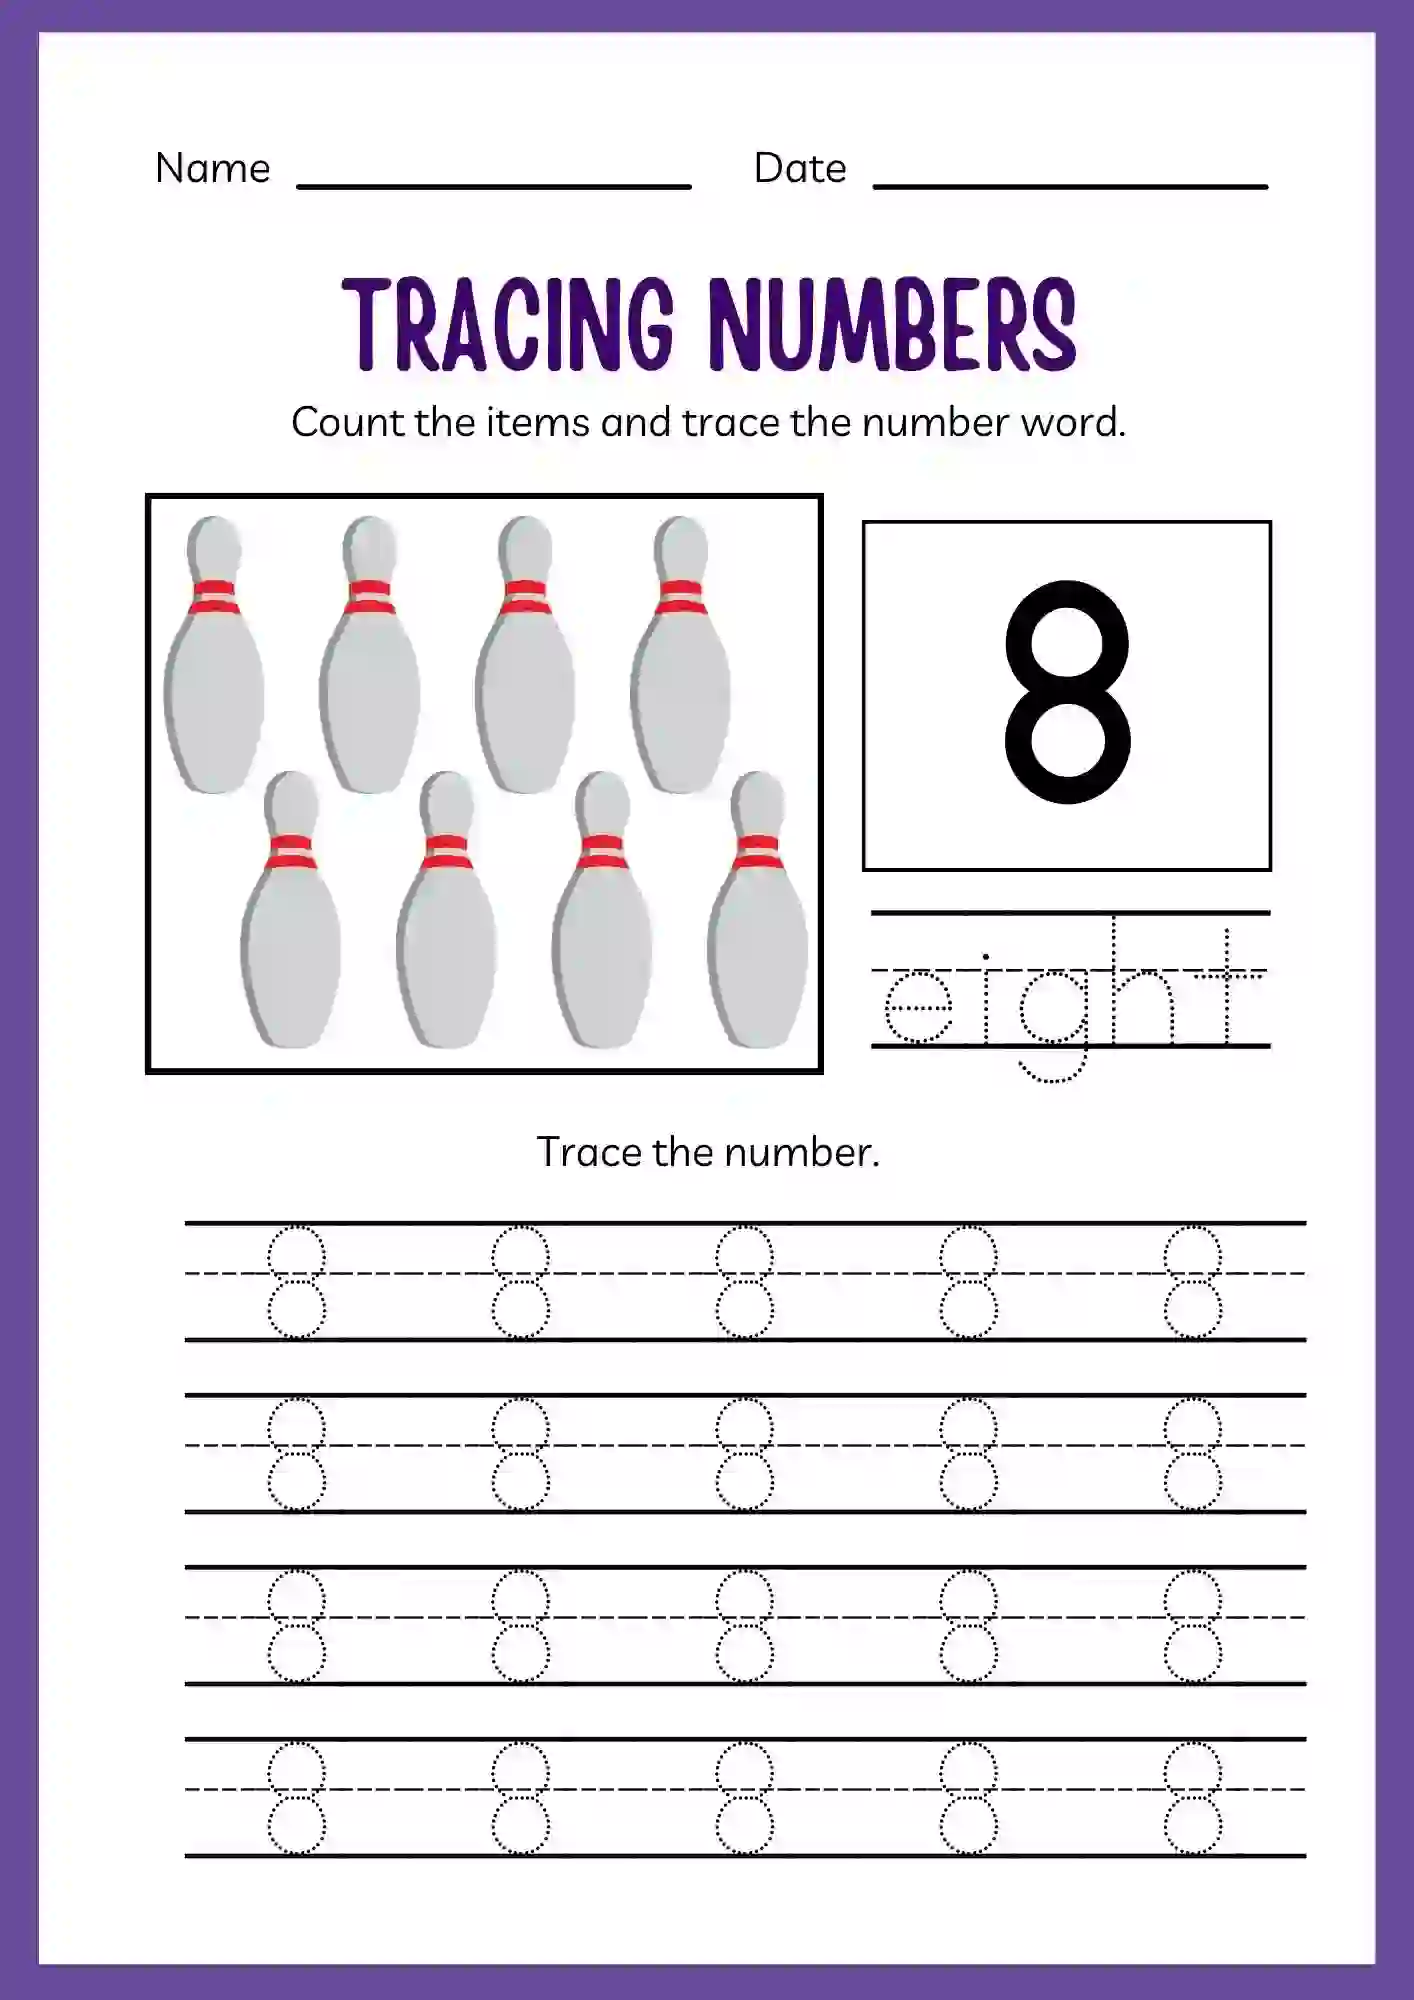 Number Tracing Worksheets 1 to 20 (Number 8 tracing sheet)